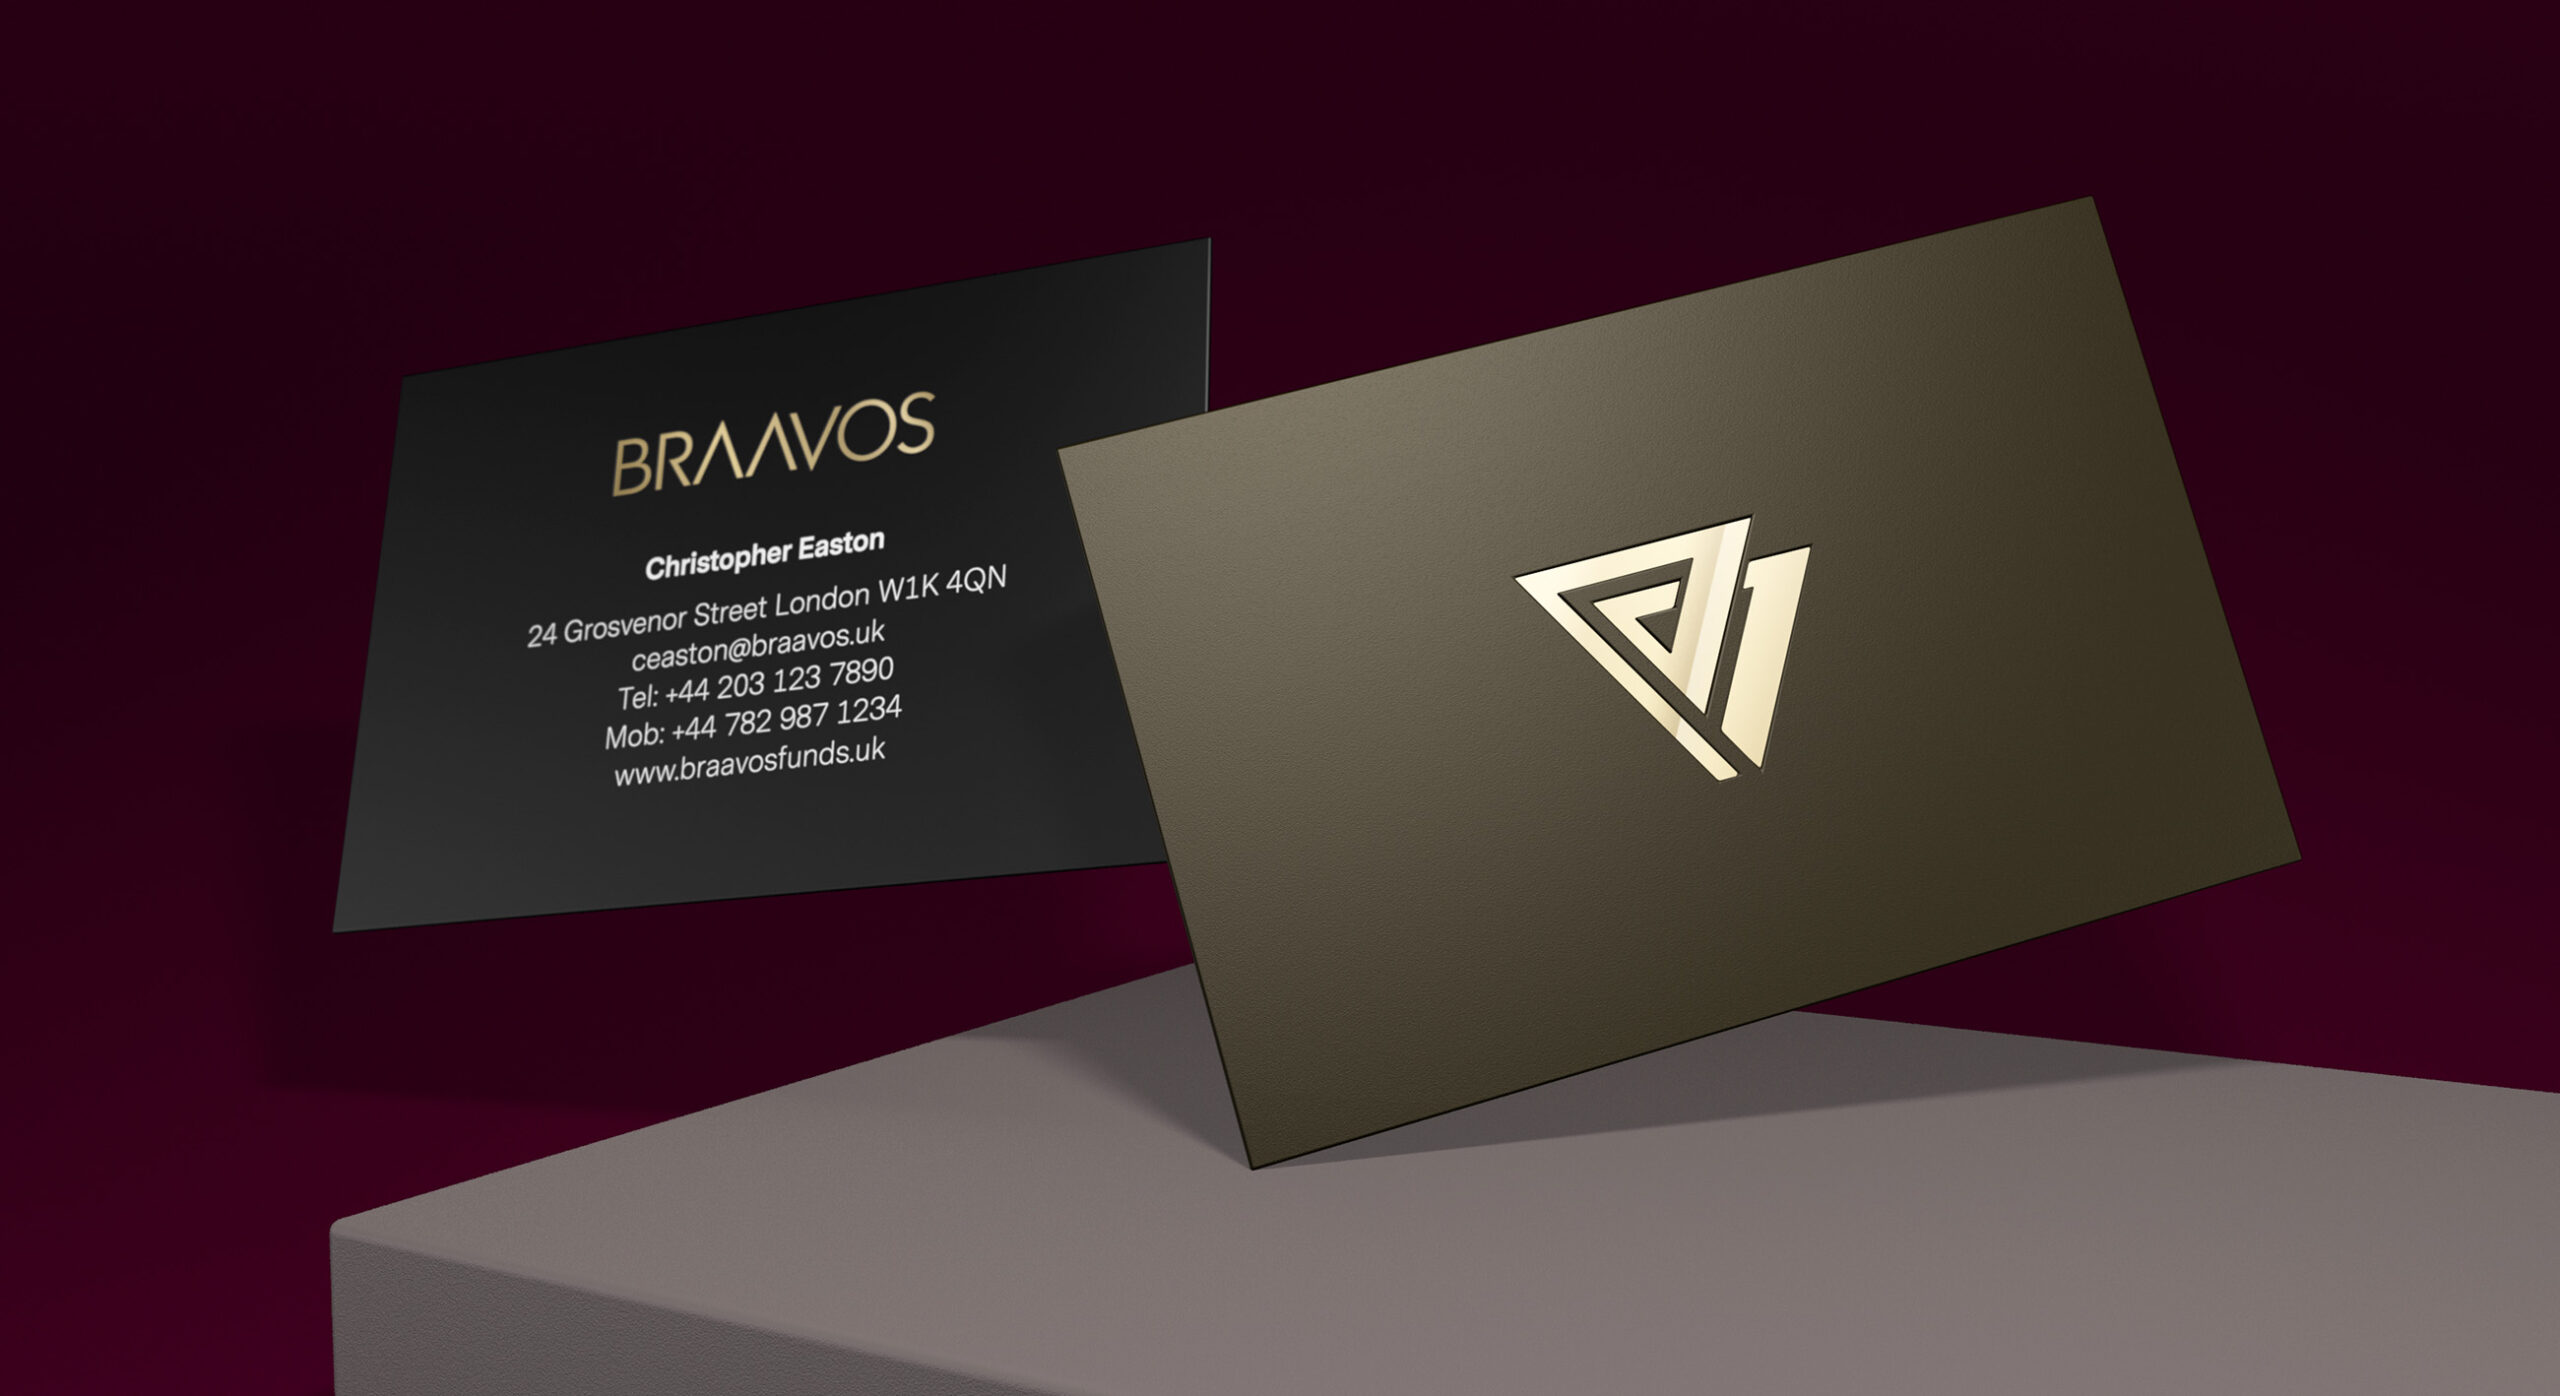 The Braavos business card features matt white gold foiling on the branded side along with clean minimalistic typography on the flip side.